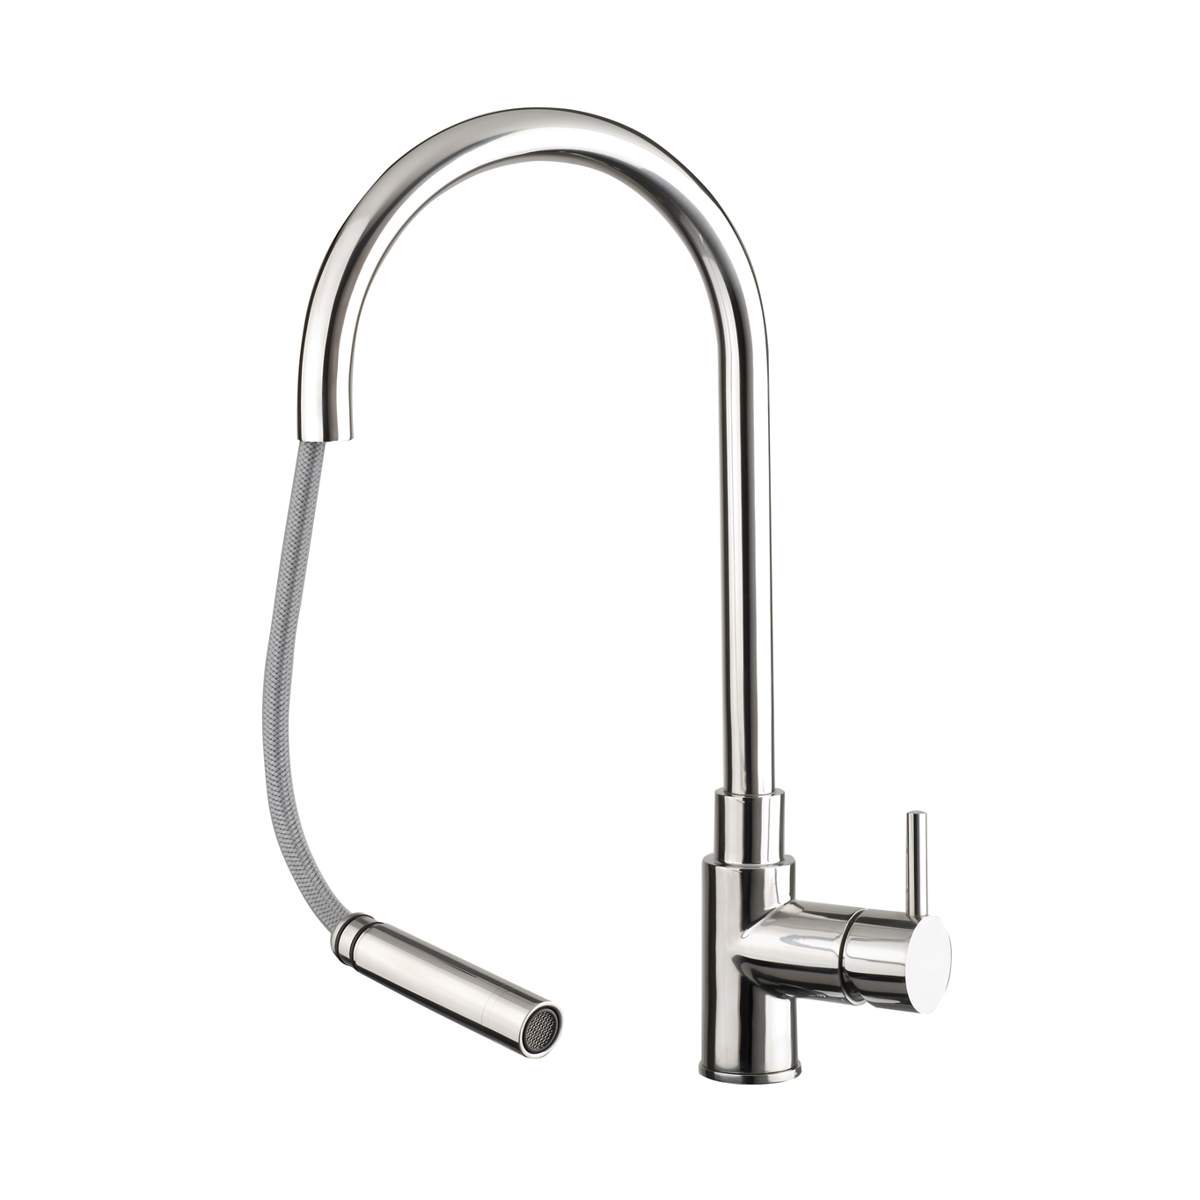 JTP Zecca Stainless Steel Pull Out Sink Mixer